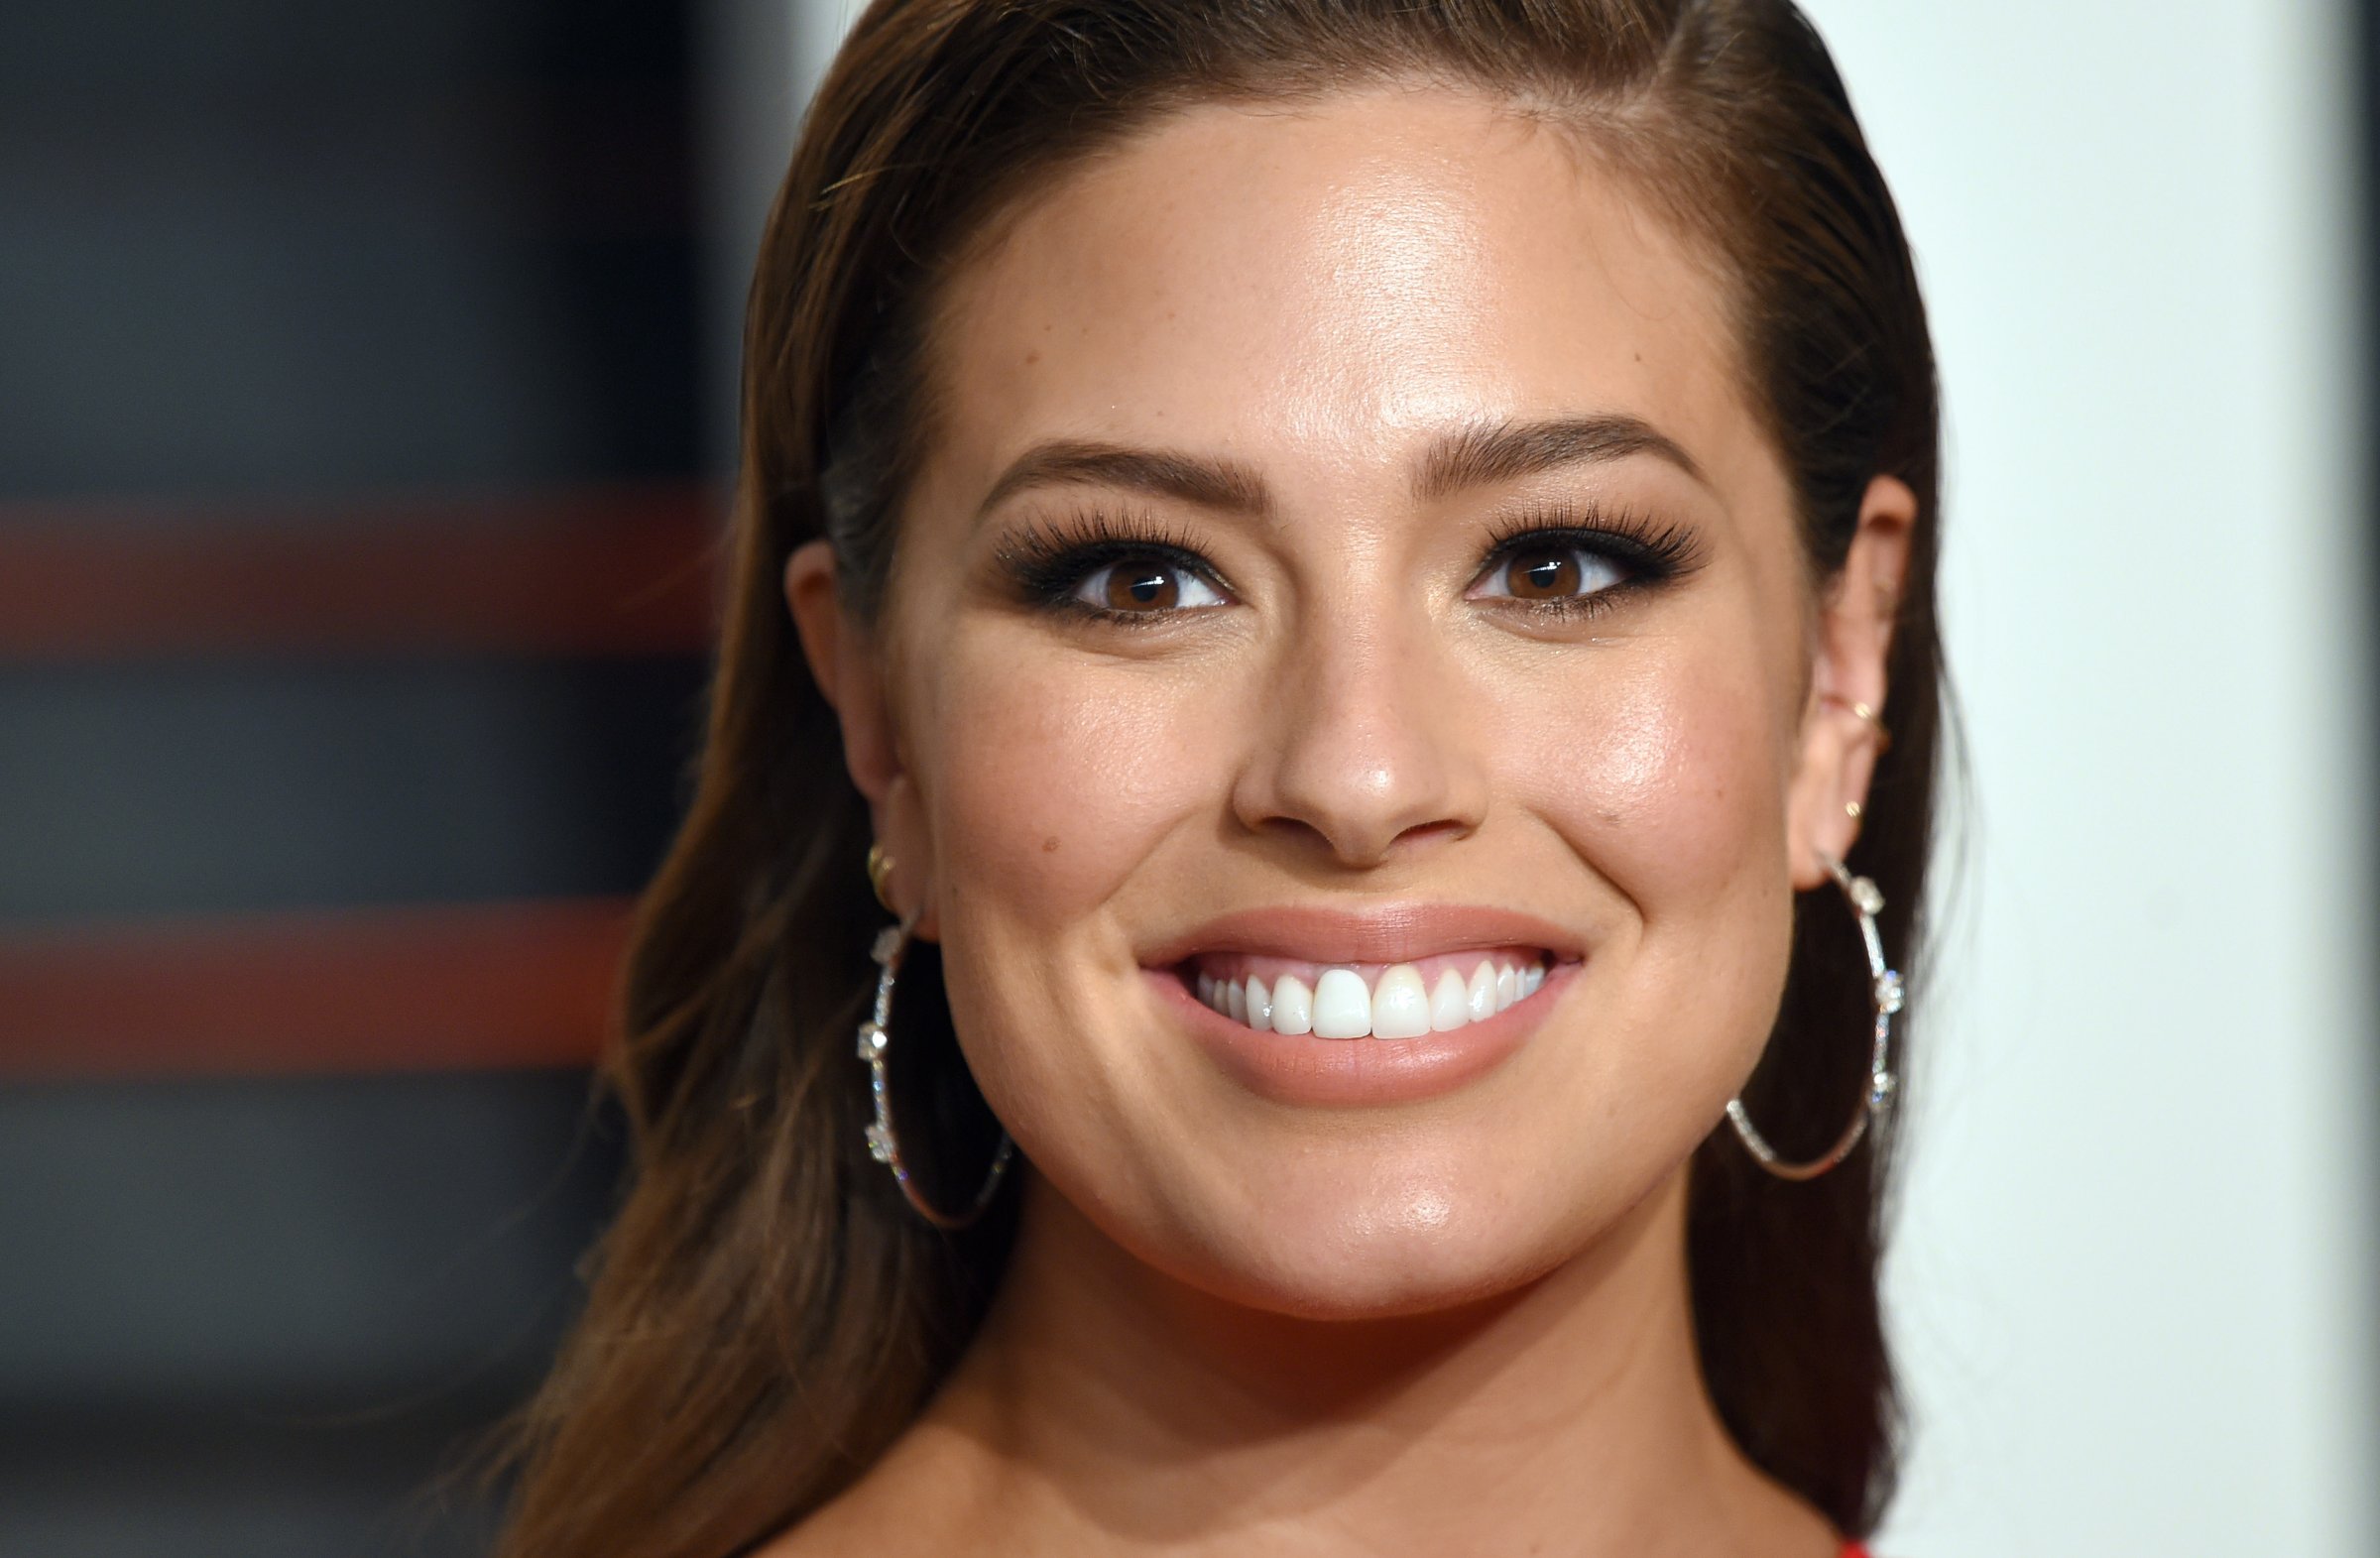 Ashley Graham attends the 2016 Vanity Fair Oscar Party Hosted By Graydon Carter at Wallis Annenberg Center for the Performing Arts on February 28, 2016 in Beverly Hills, California.